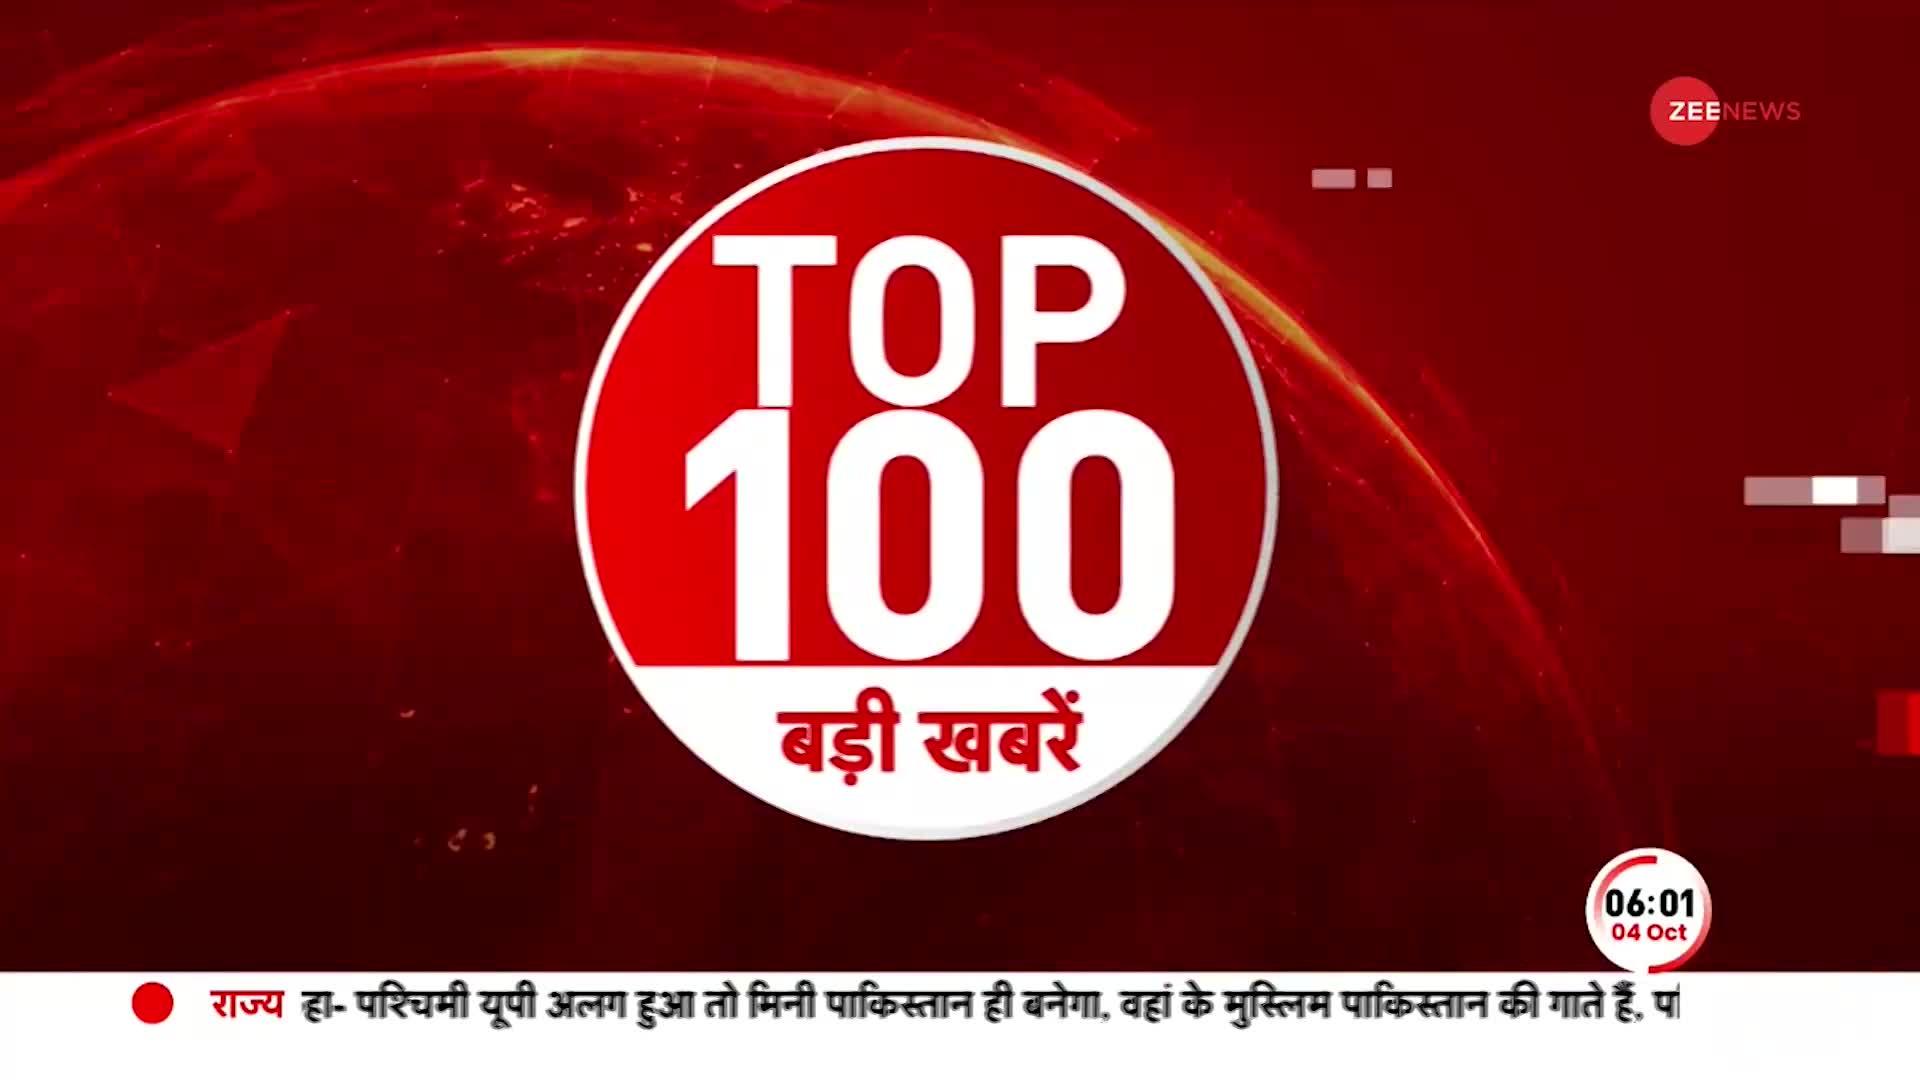 Top News Today: अभी की 100 बड़ी खबरें | Non Stop News | Speed News | Trudeau on India Latest